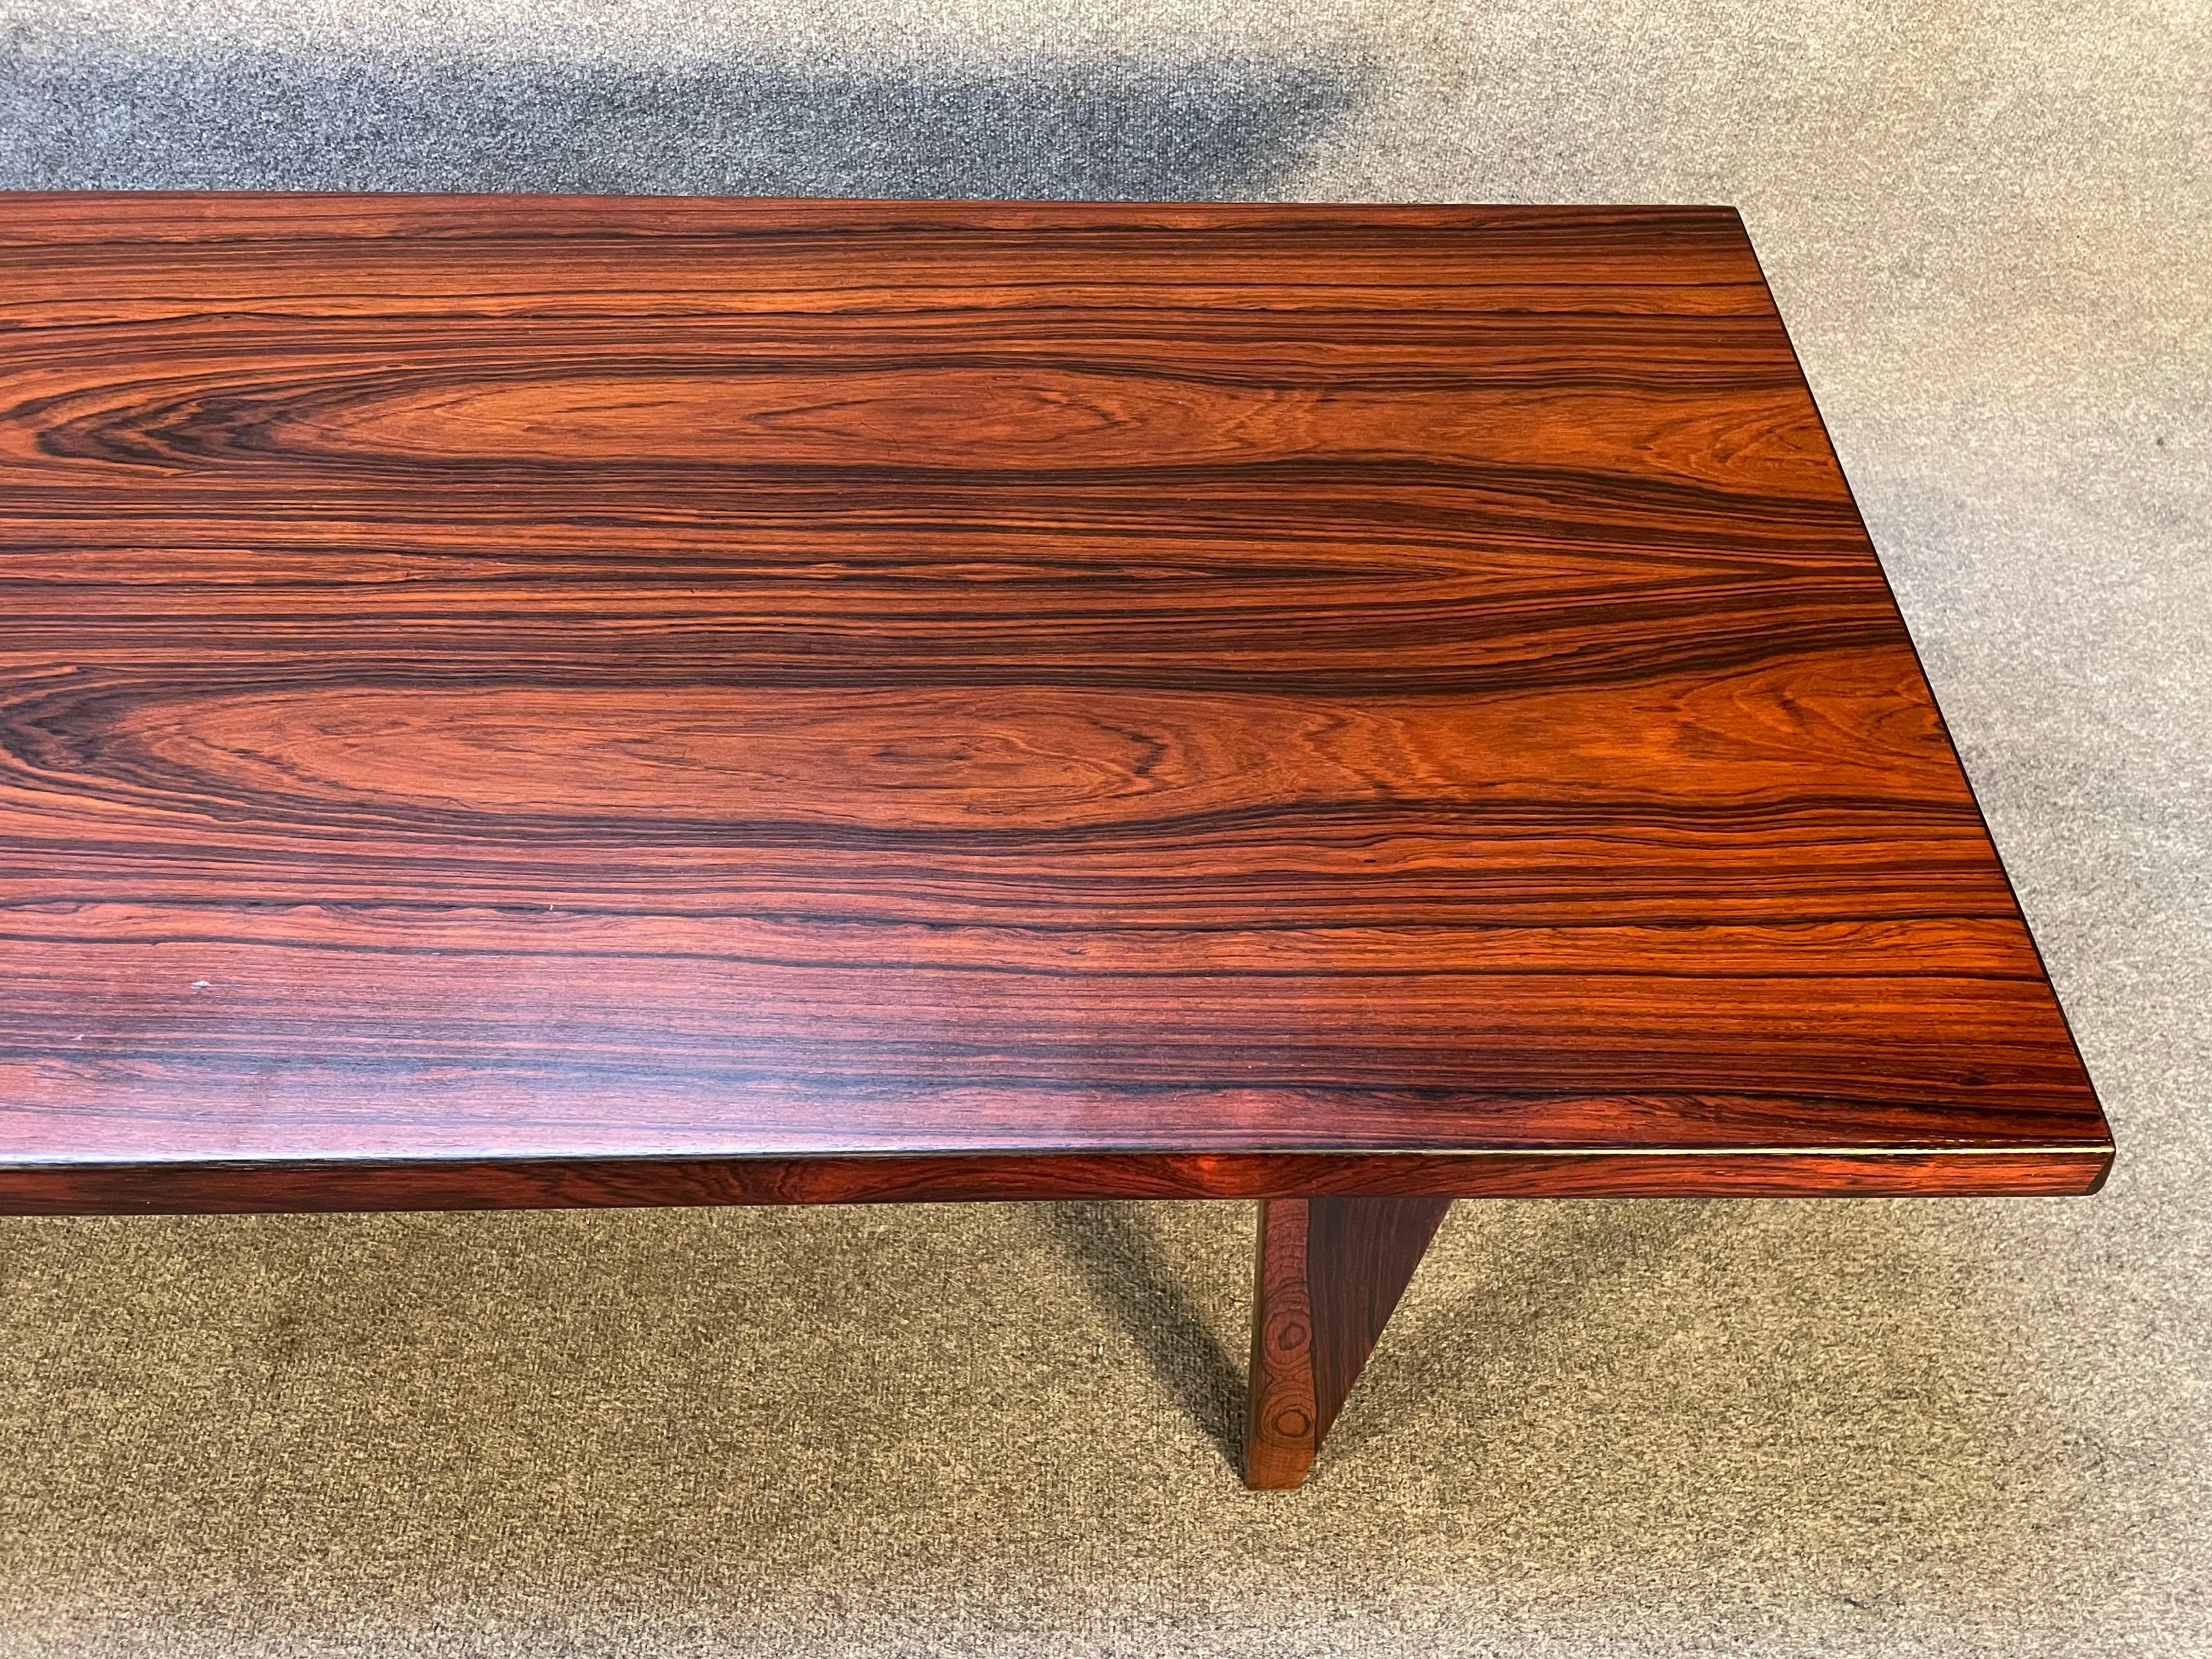 Vintage Danish Mid-Century Modern Rosewood and Marble Coffee Table In Good Condition For Sale In San Marcos, CA